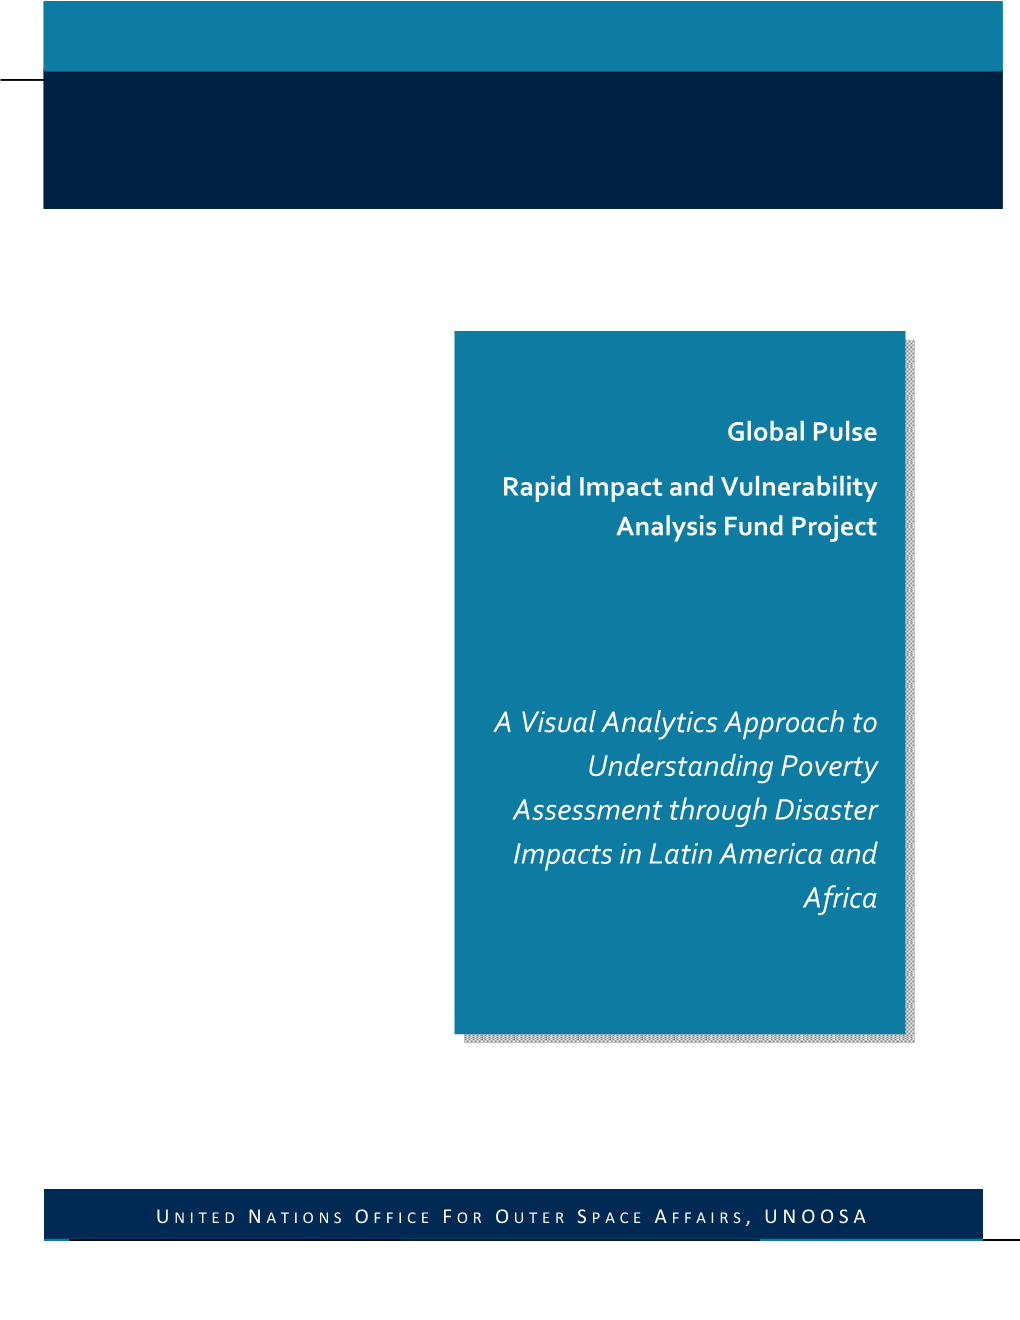 A Visual Analytics Approach to Understanding Poverty Assessment Through Disaster Impacts in Latin America and Africa